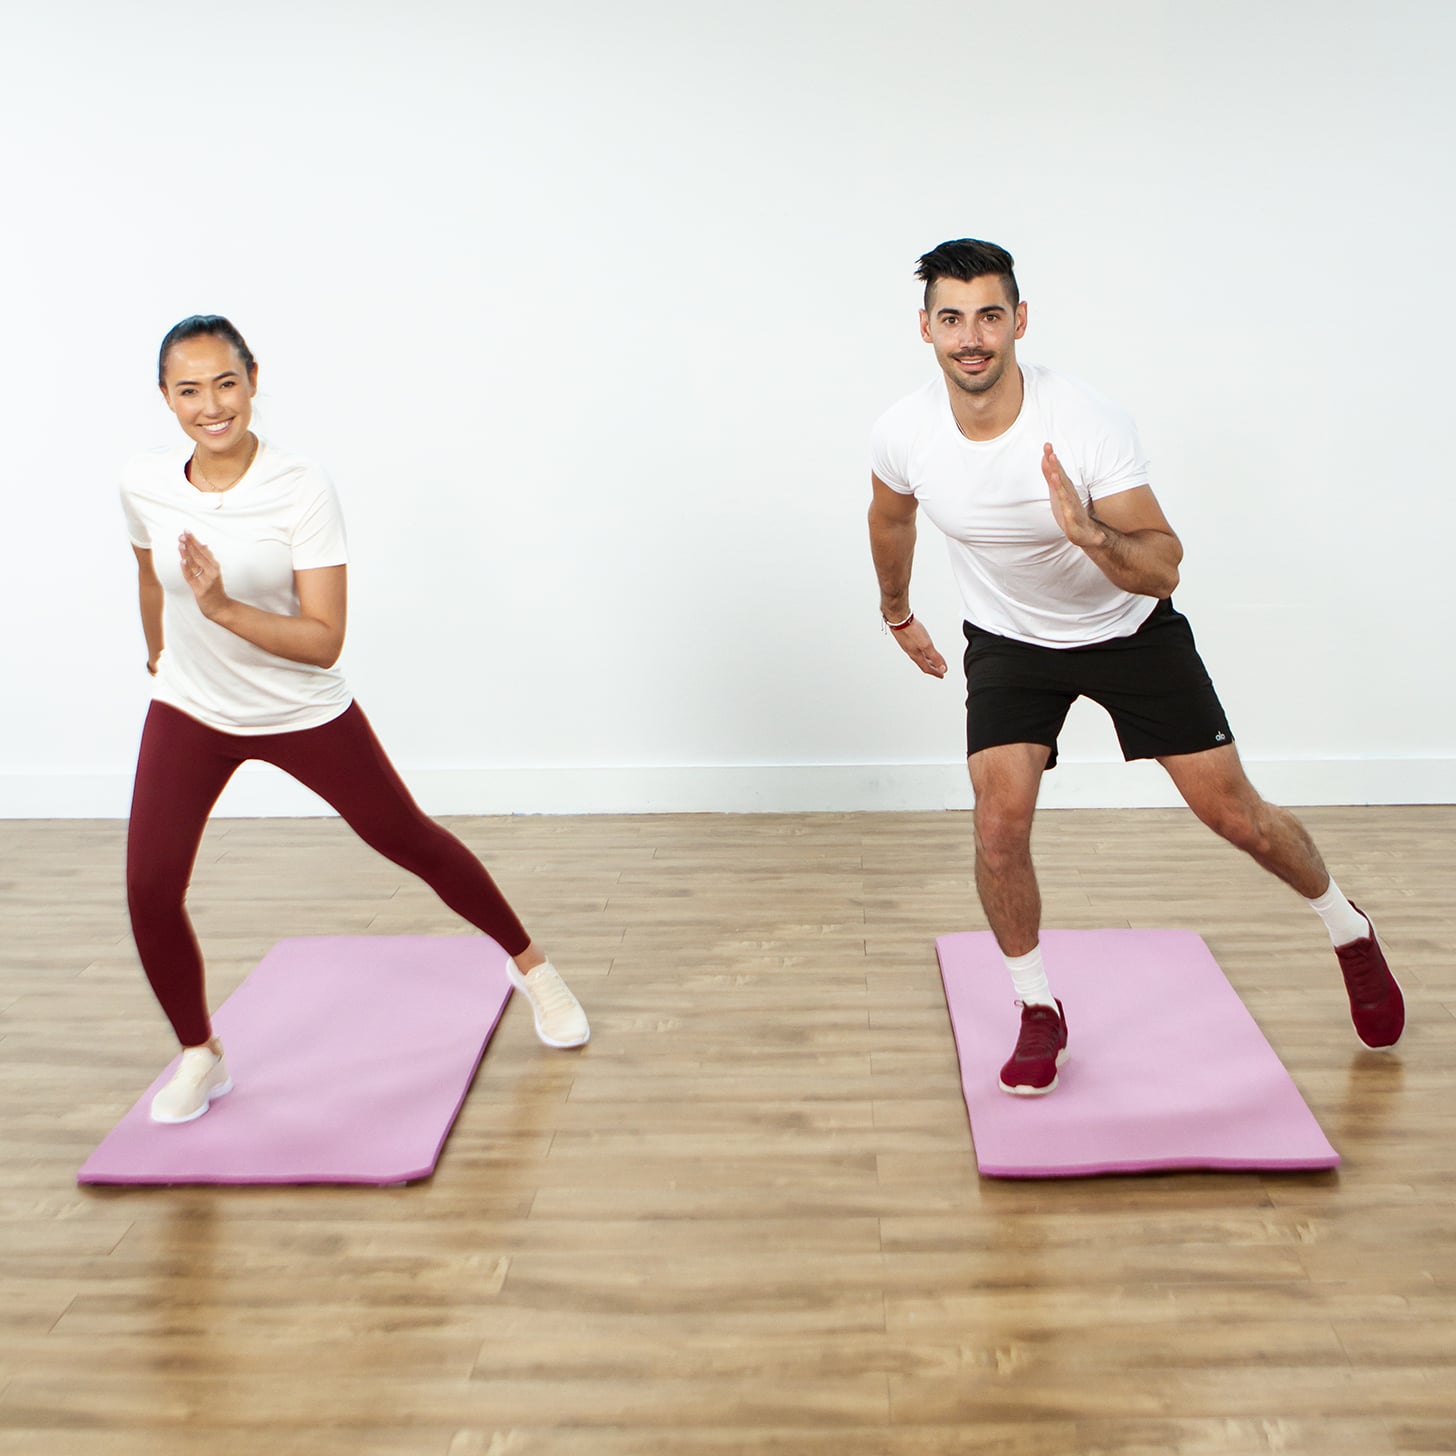 25-Minute Low-Impact Cardio Workout: Warm Up Your Body